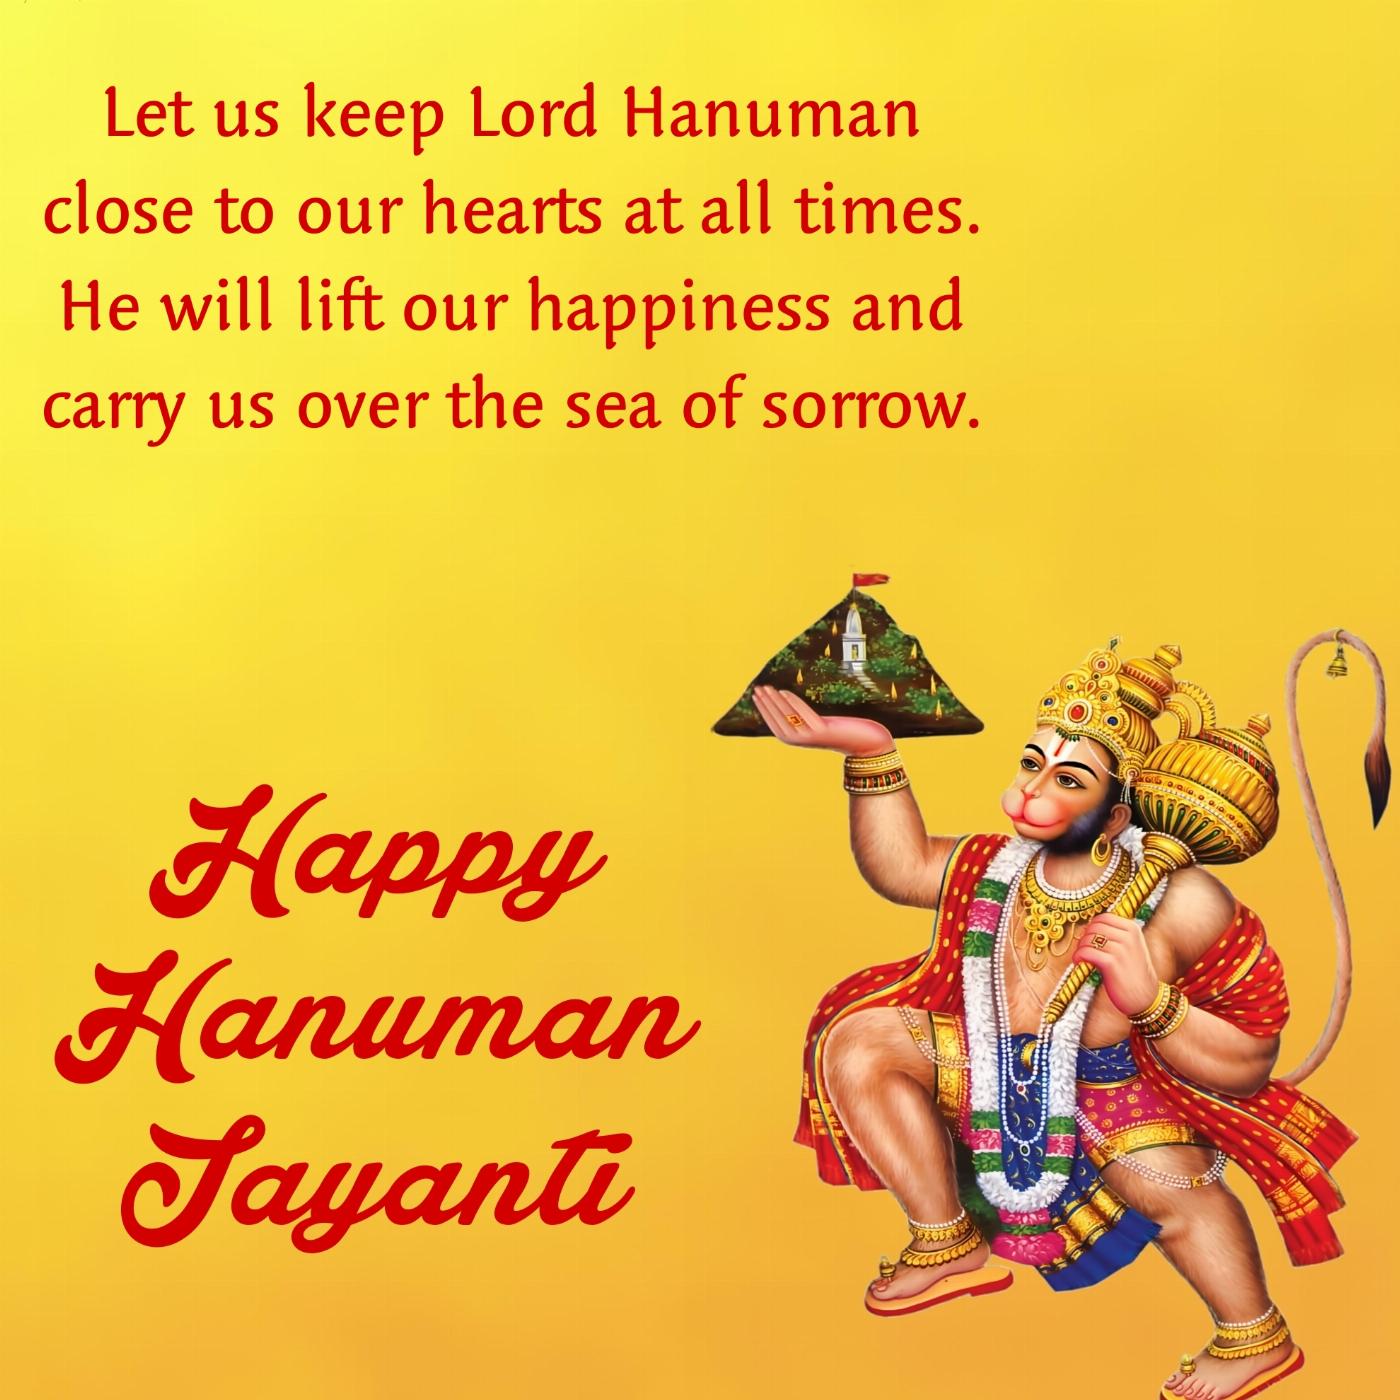 Let us keep Lord Hanuman close to our hearts at all times